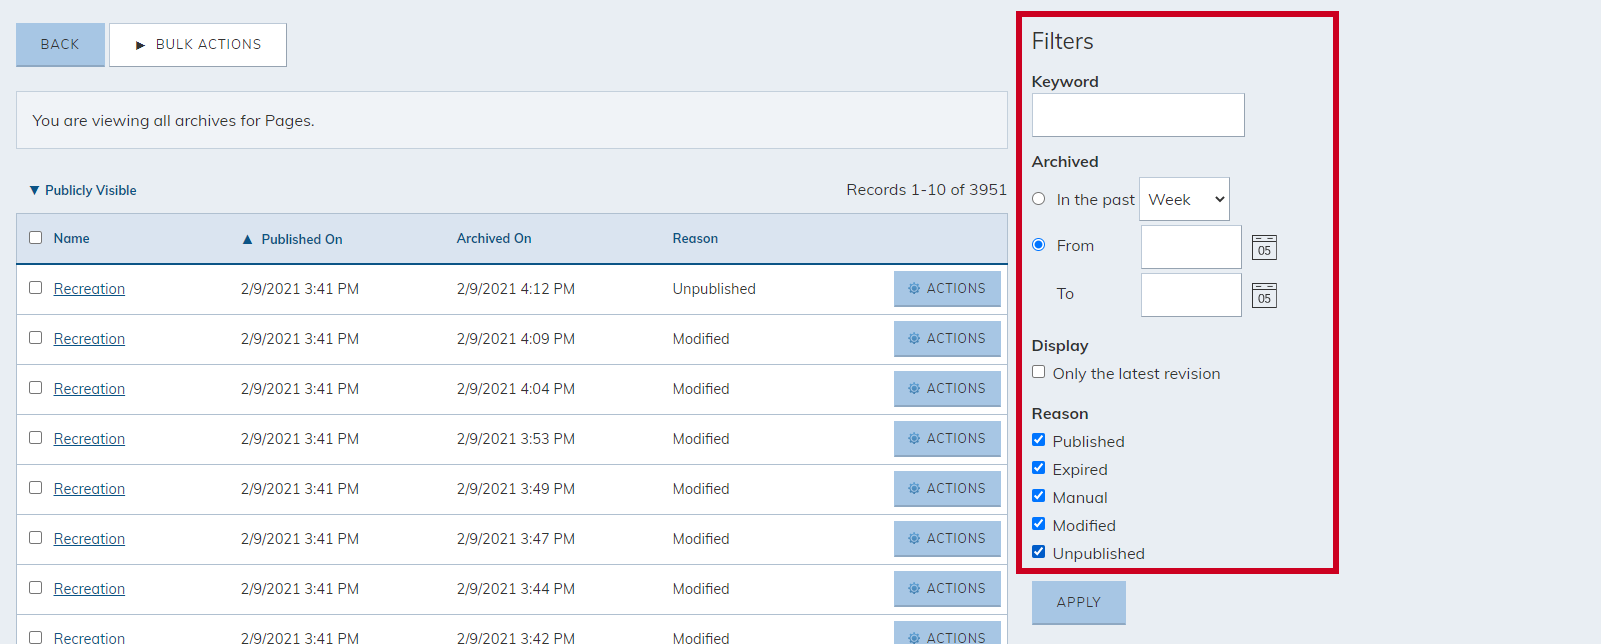 Configure the filters